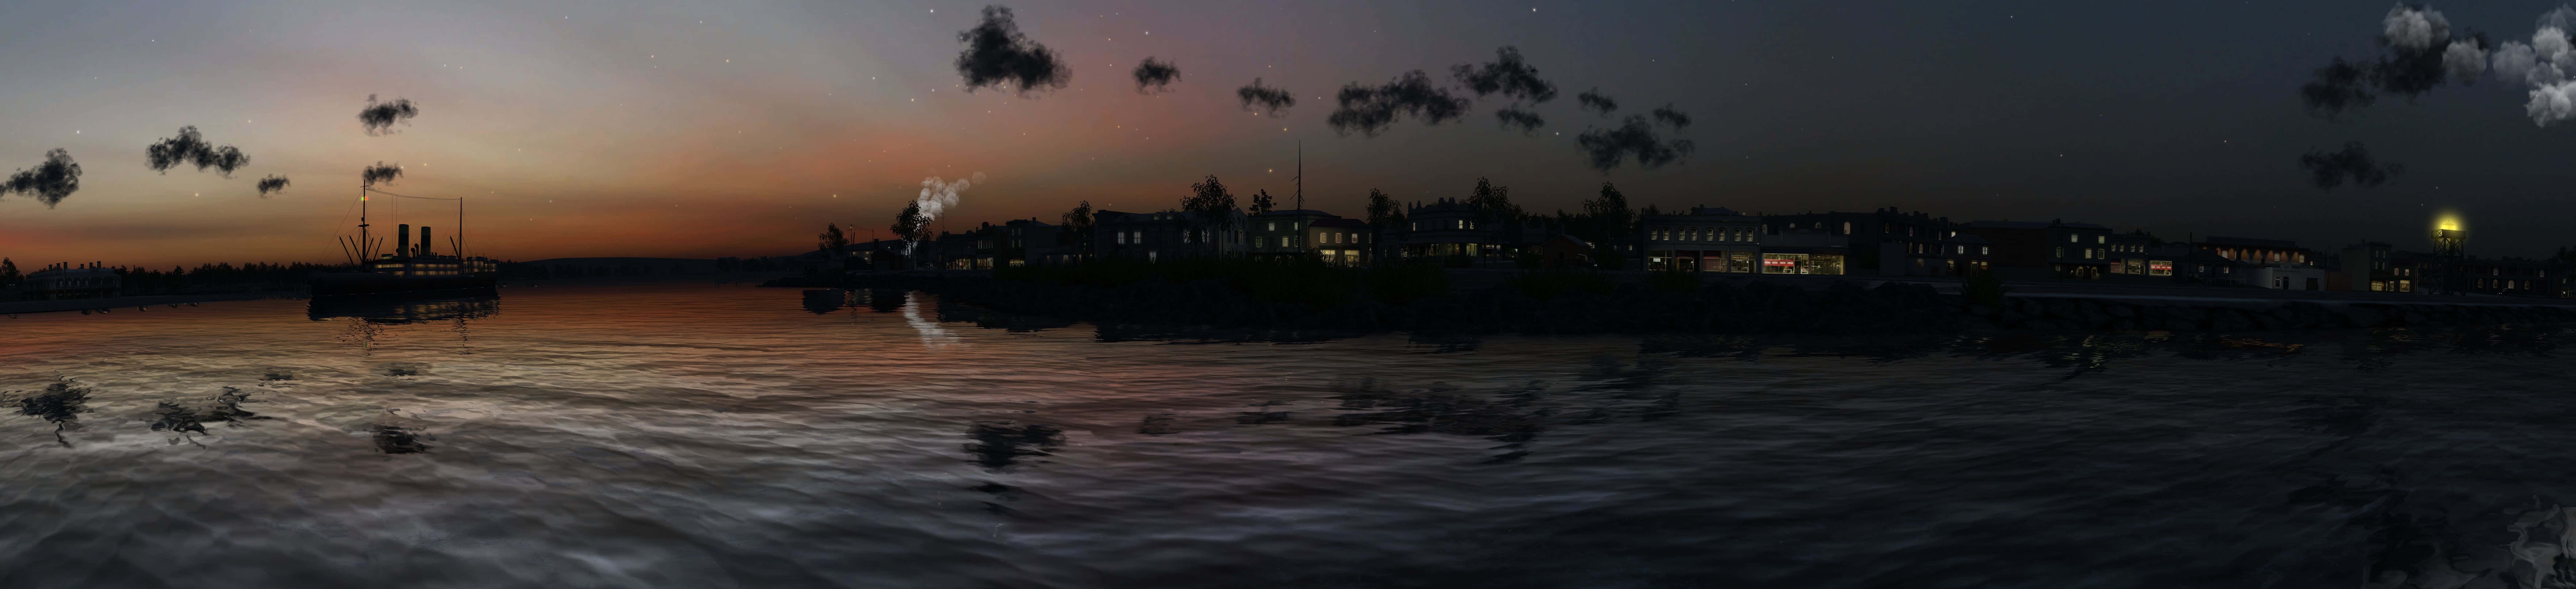 Twilight Waterscape Panorama Wallpaper